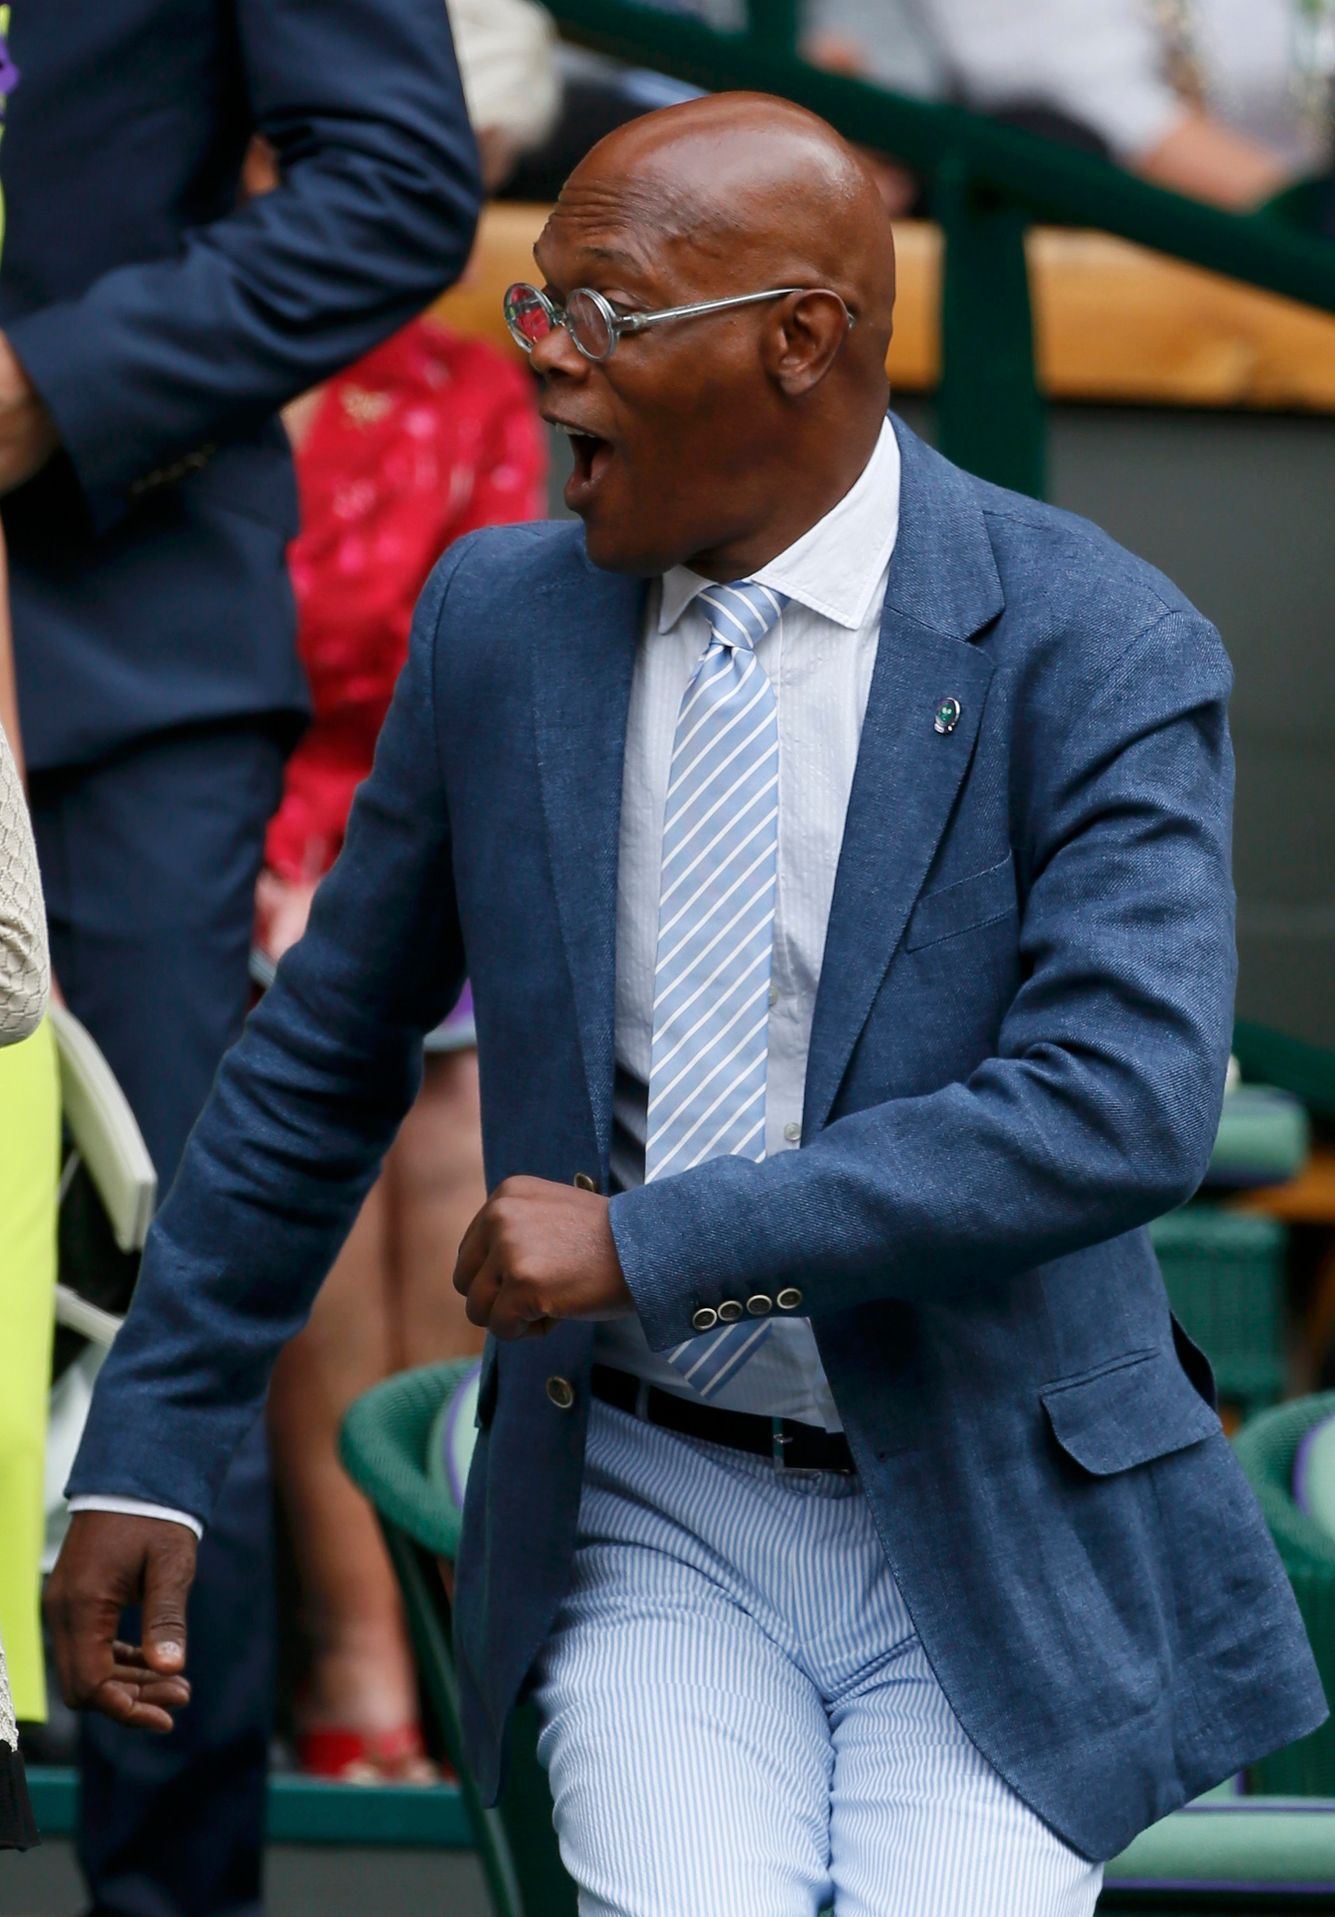 Actor Samuel L Jackson arrives on Centre Court at the Wimbledon Tennis Championships, in London